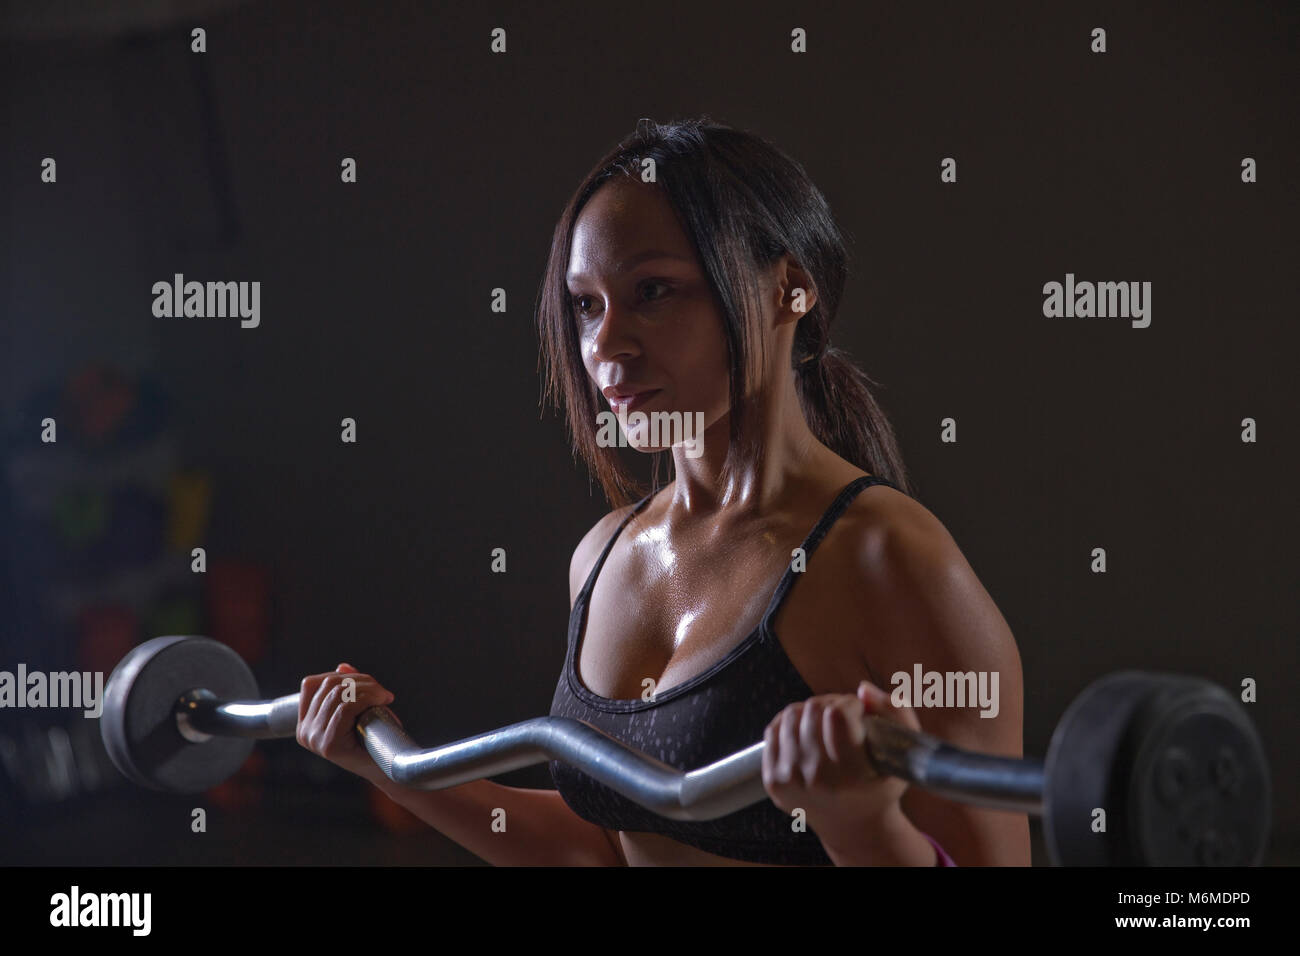 Mixed race athlete lifting weights in gym Stock Photo